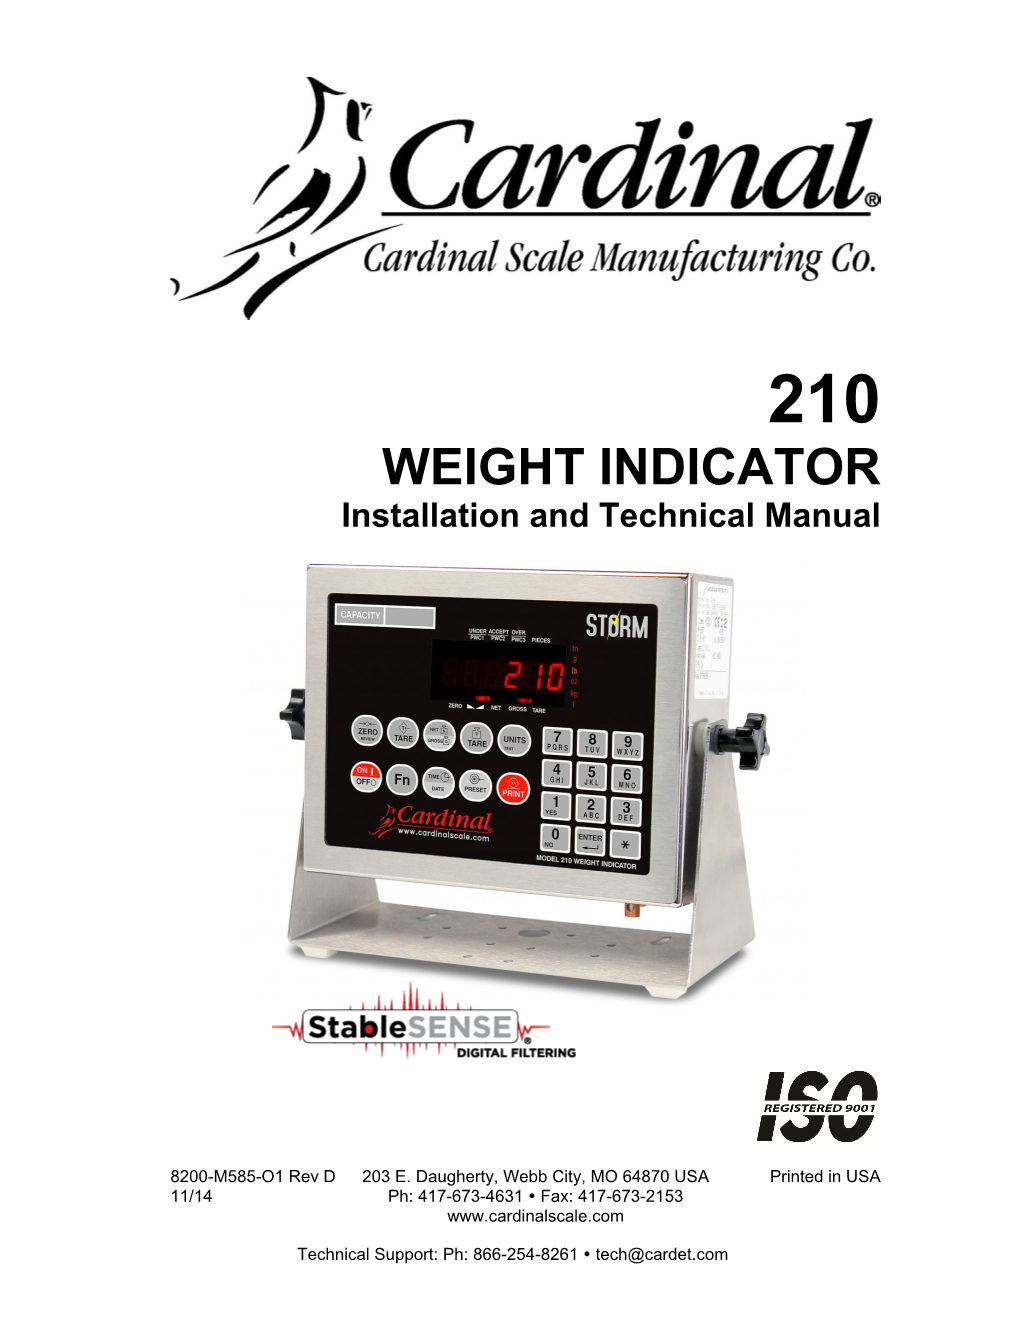 WEIGHT INDICATOR Installation and Technical Manual